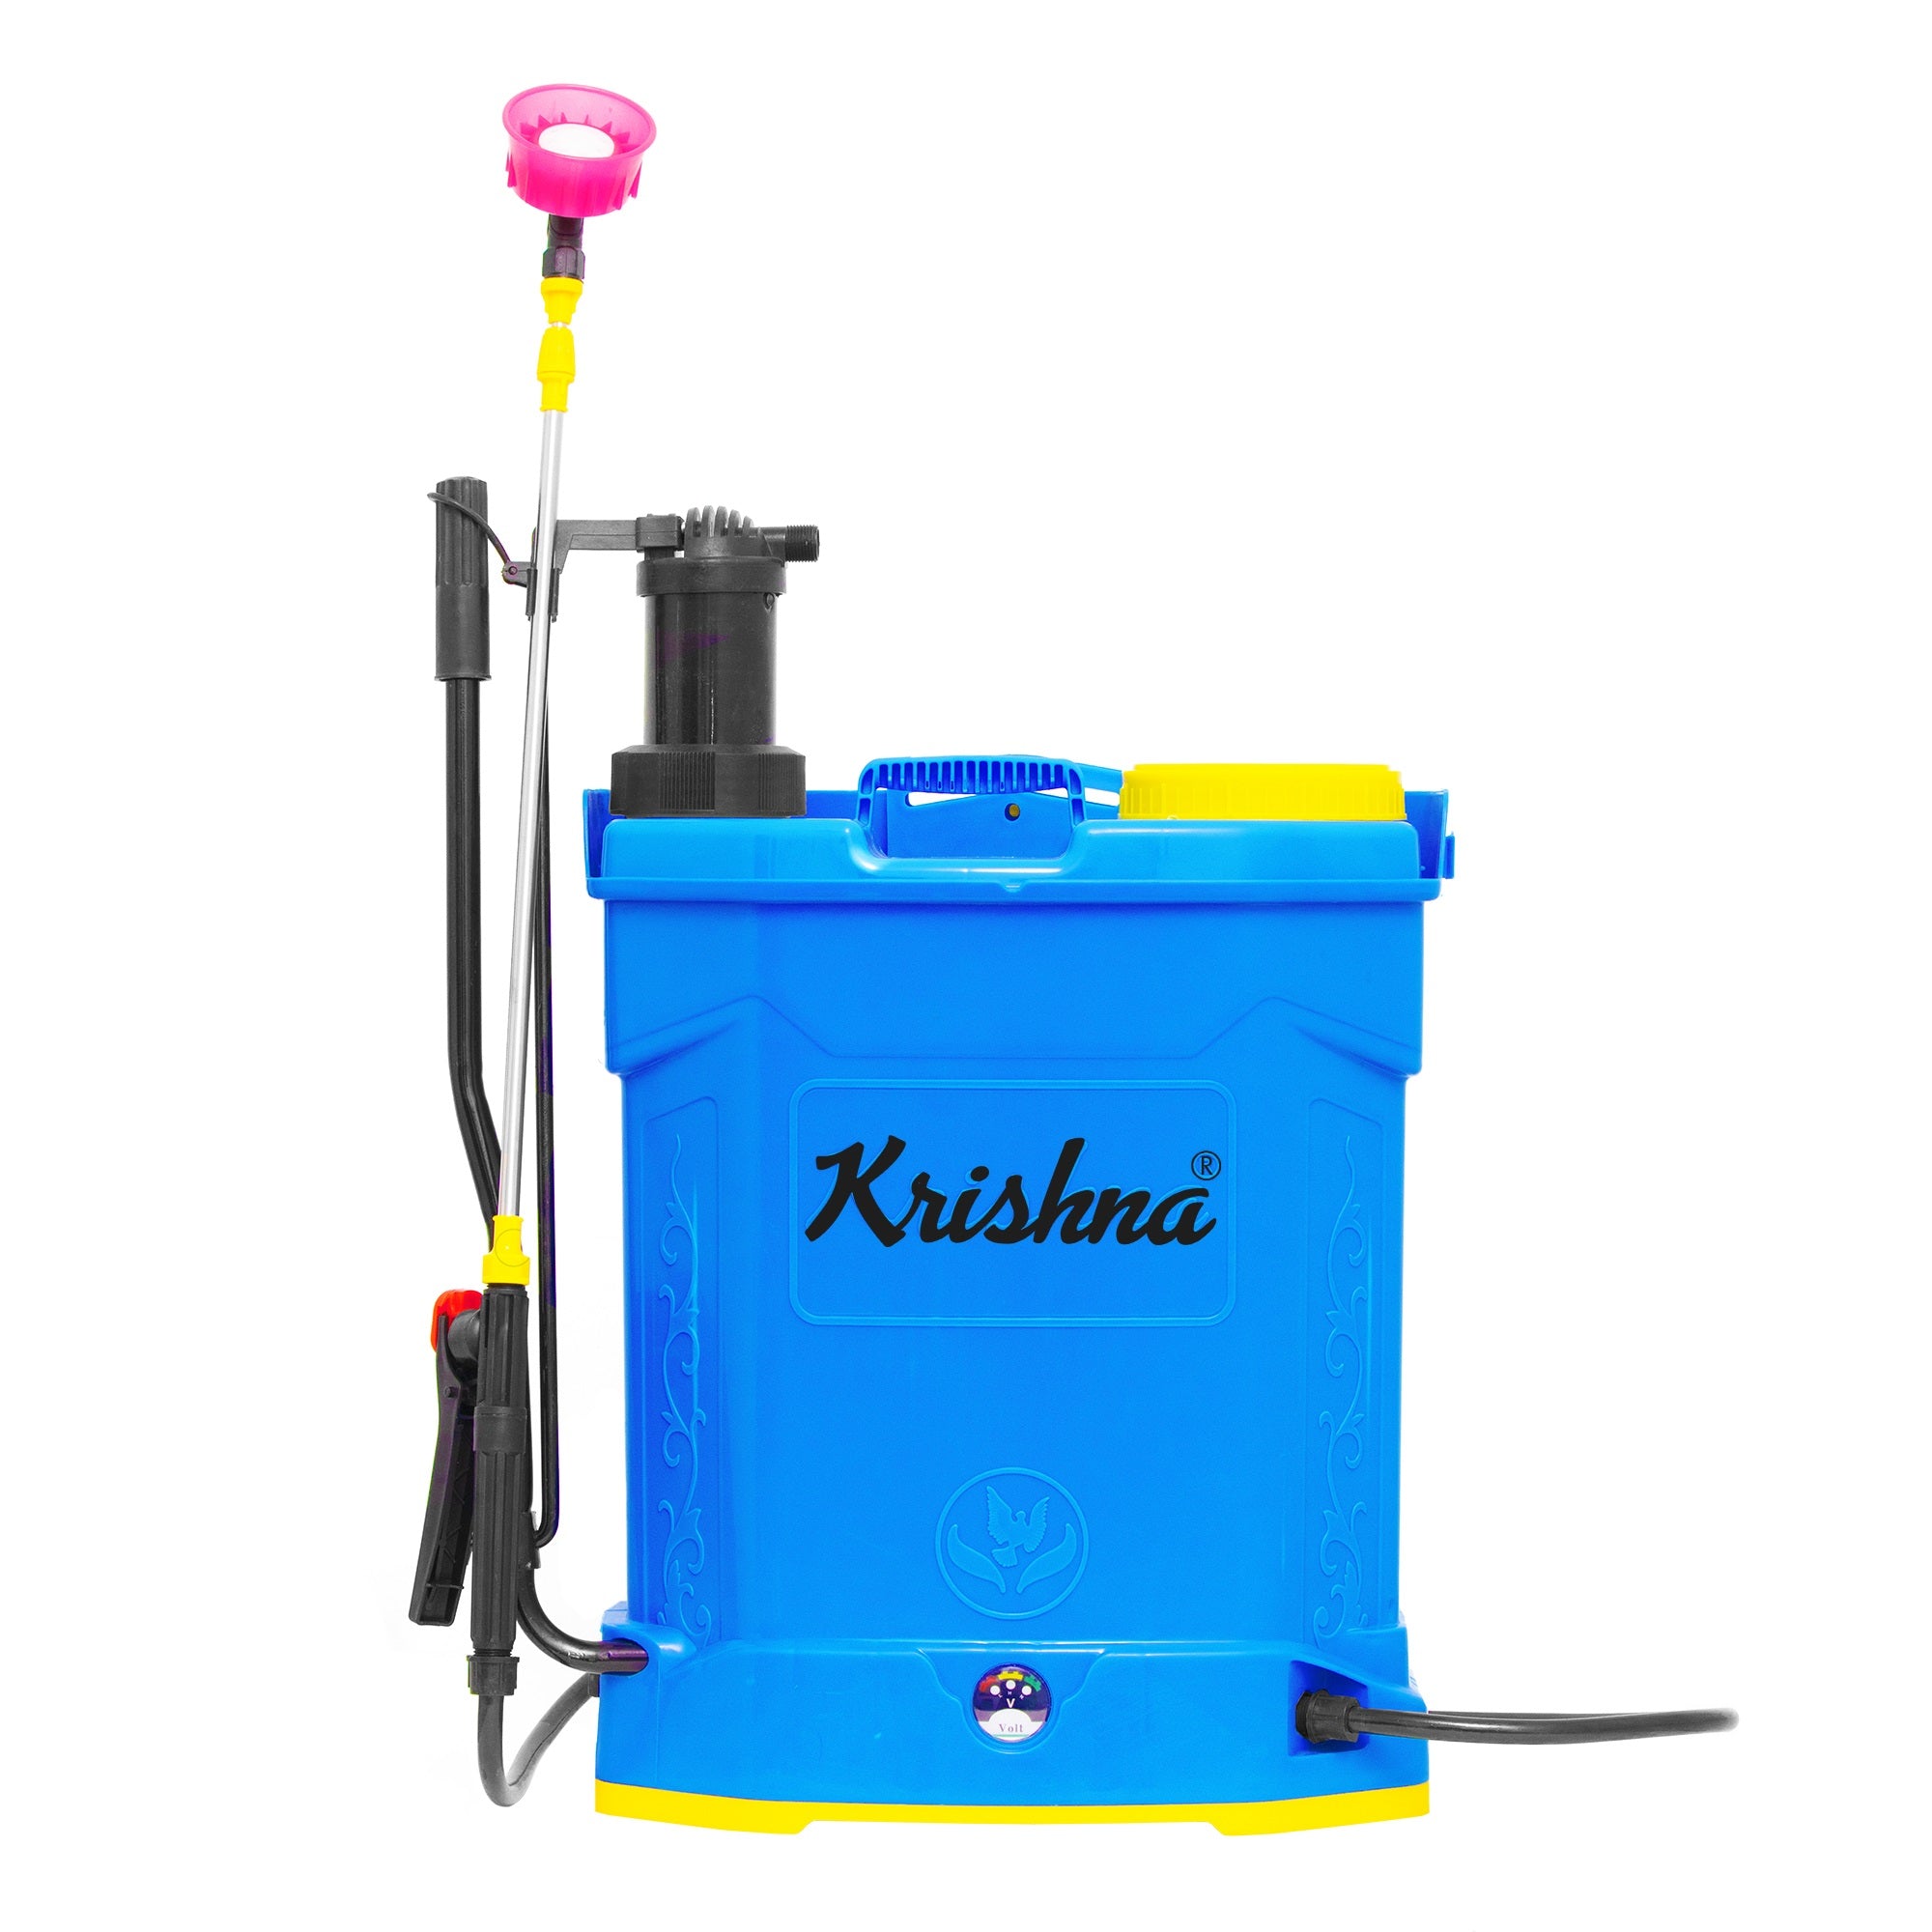 Krishna Hand And Battery Operated Sprayer With Knapsack For Agriculture 20L 12V 12AMP MFP-BT-2IN1-12